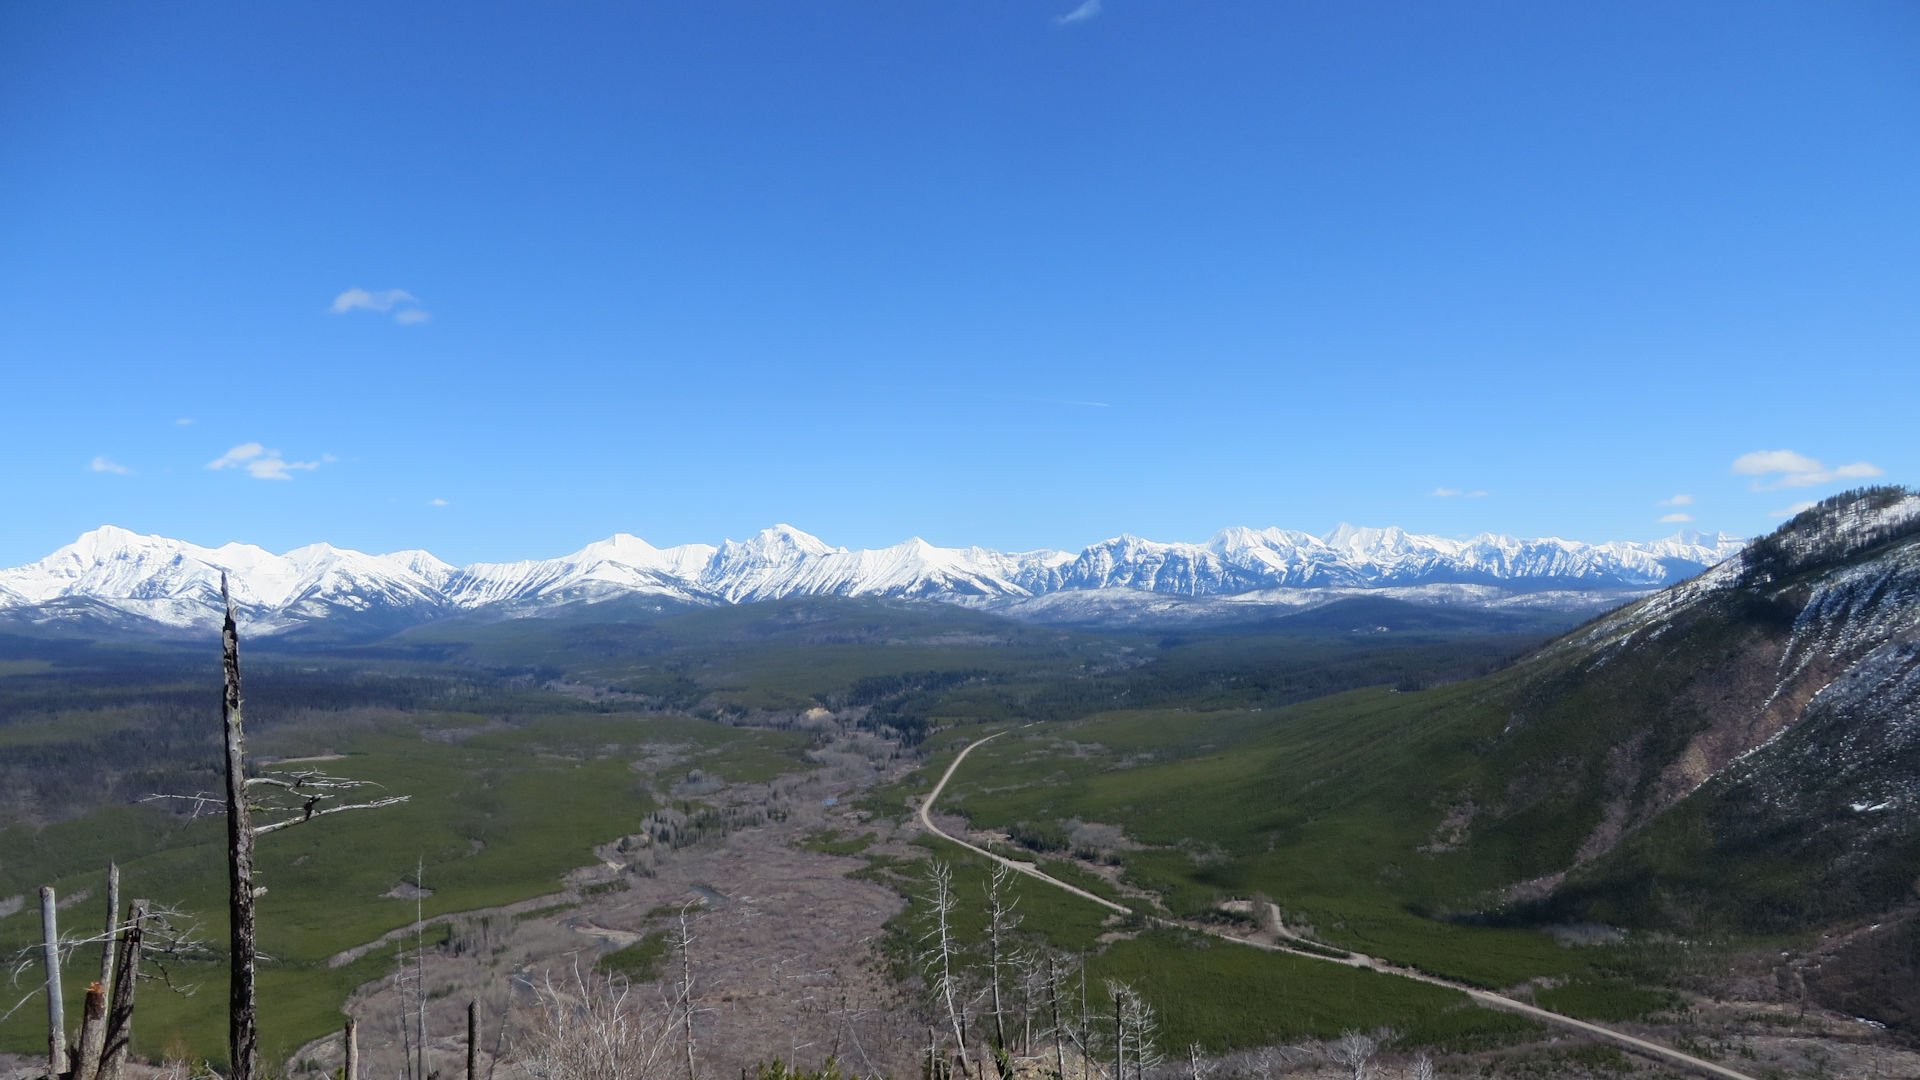 View East into Glacier NP from Glacier View Mtn, April 16, 2017 - W. K. Walker